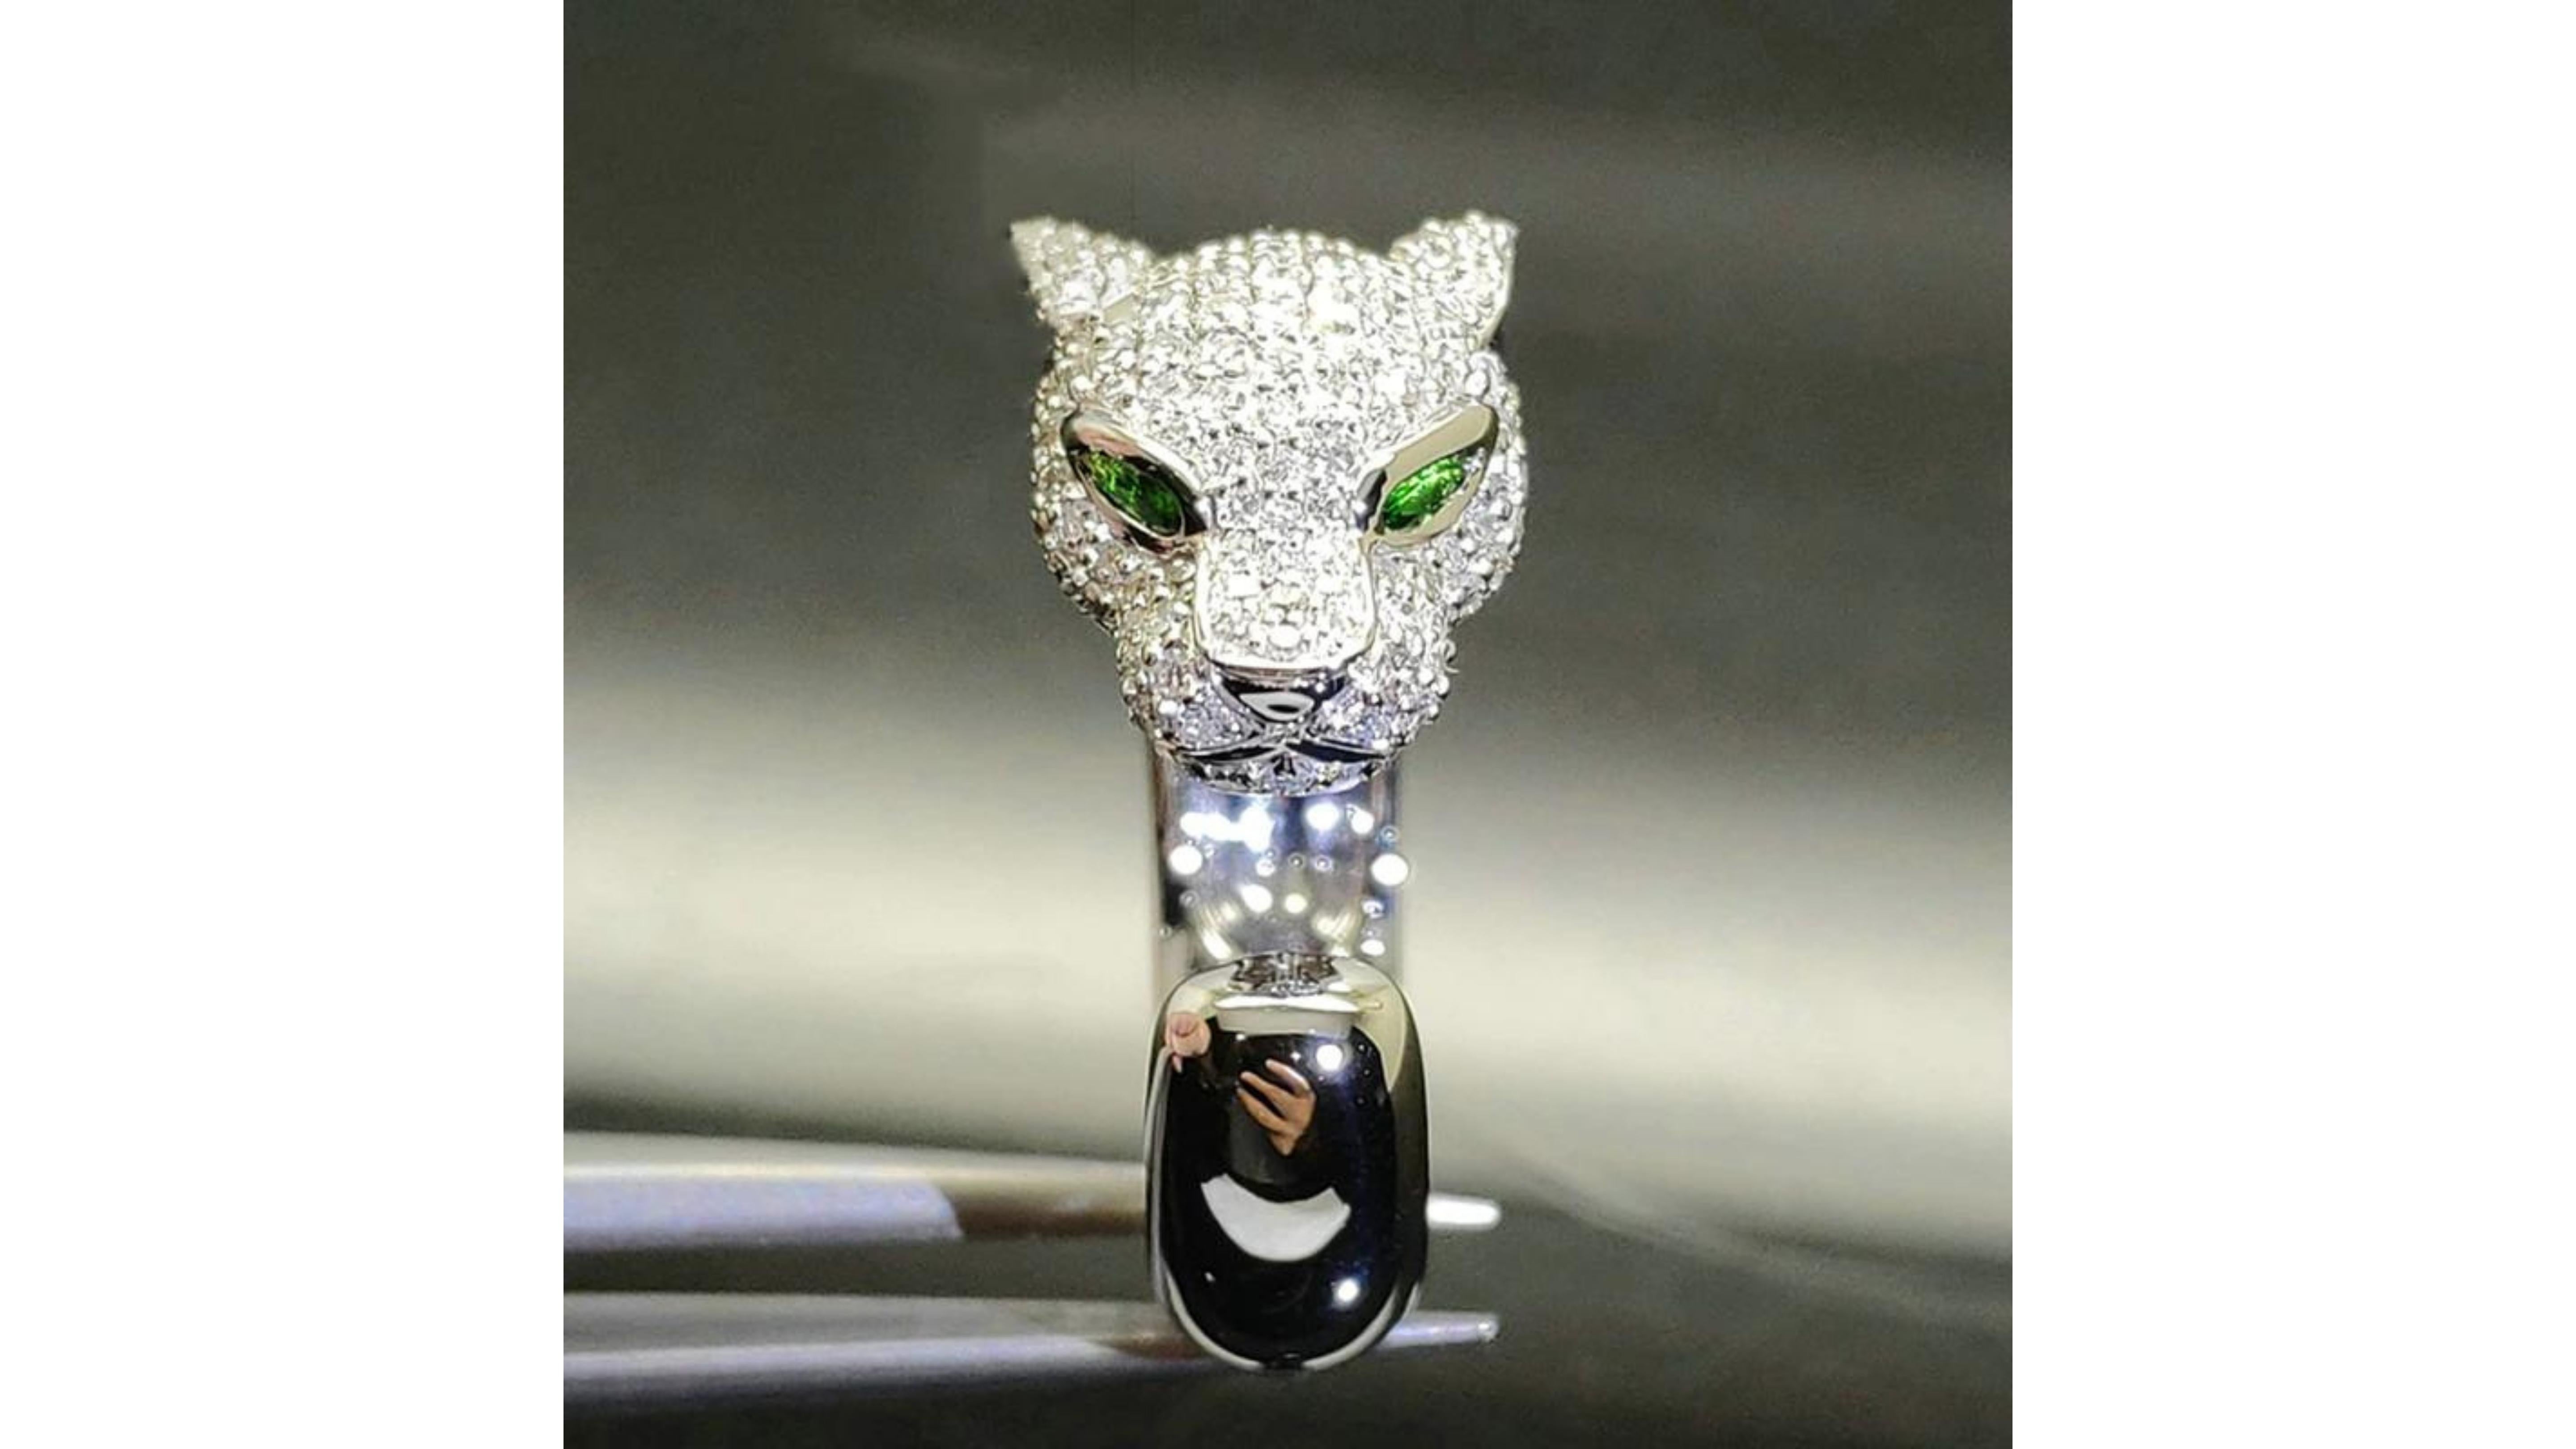 Leaped head Tsavorite Diamond Ring 18 Karat white Gold  . With eyes in Tsavorite it really does catch your attention and also note the ears and nose in the detail.  It can be in Rose and Yellow Gold too. Rounds Diamonds are on the head too.    If